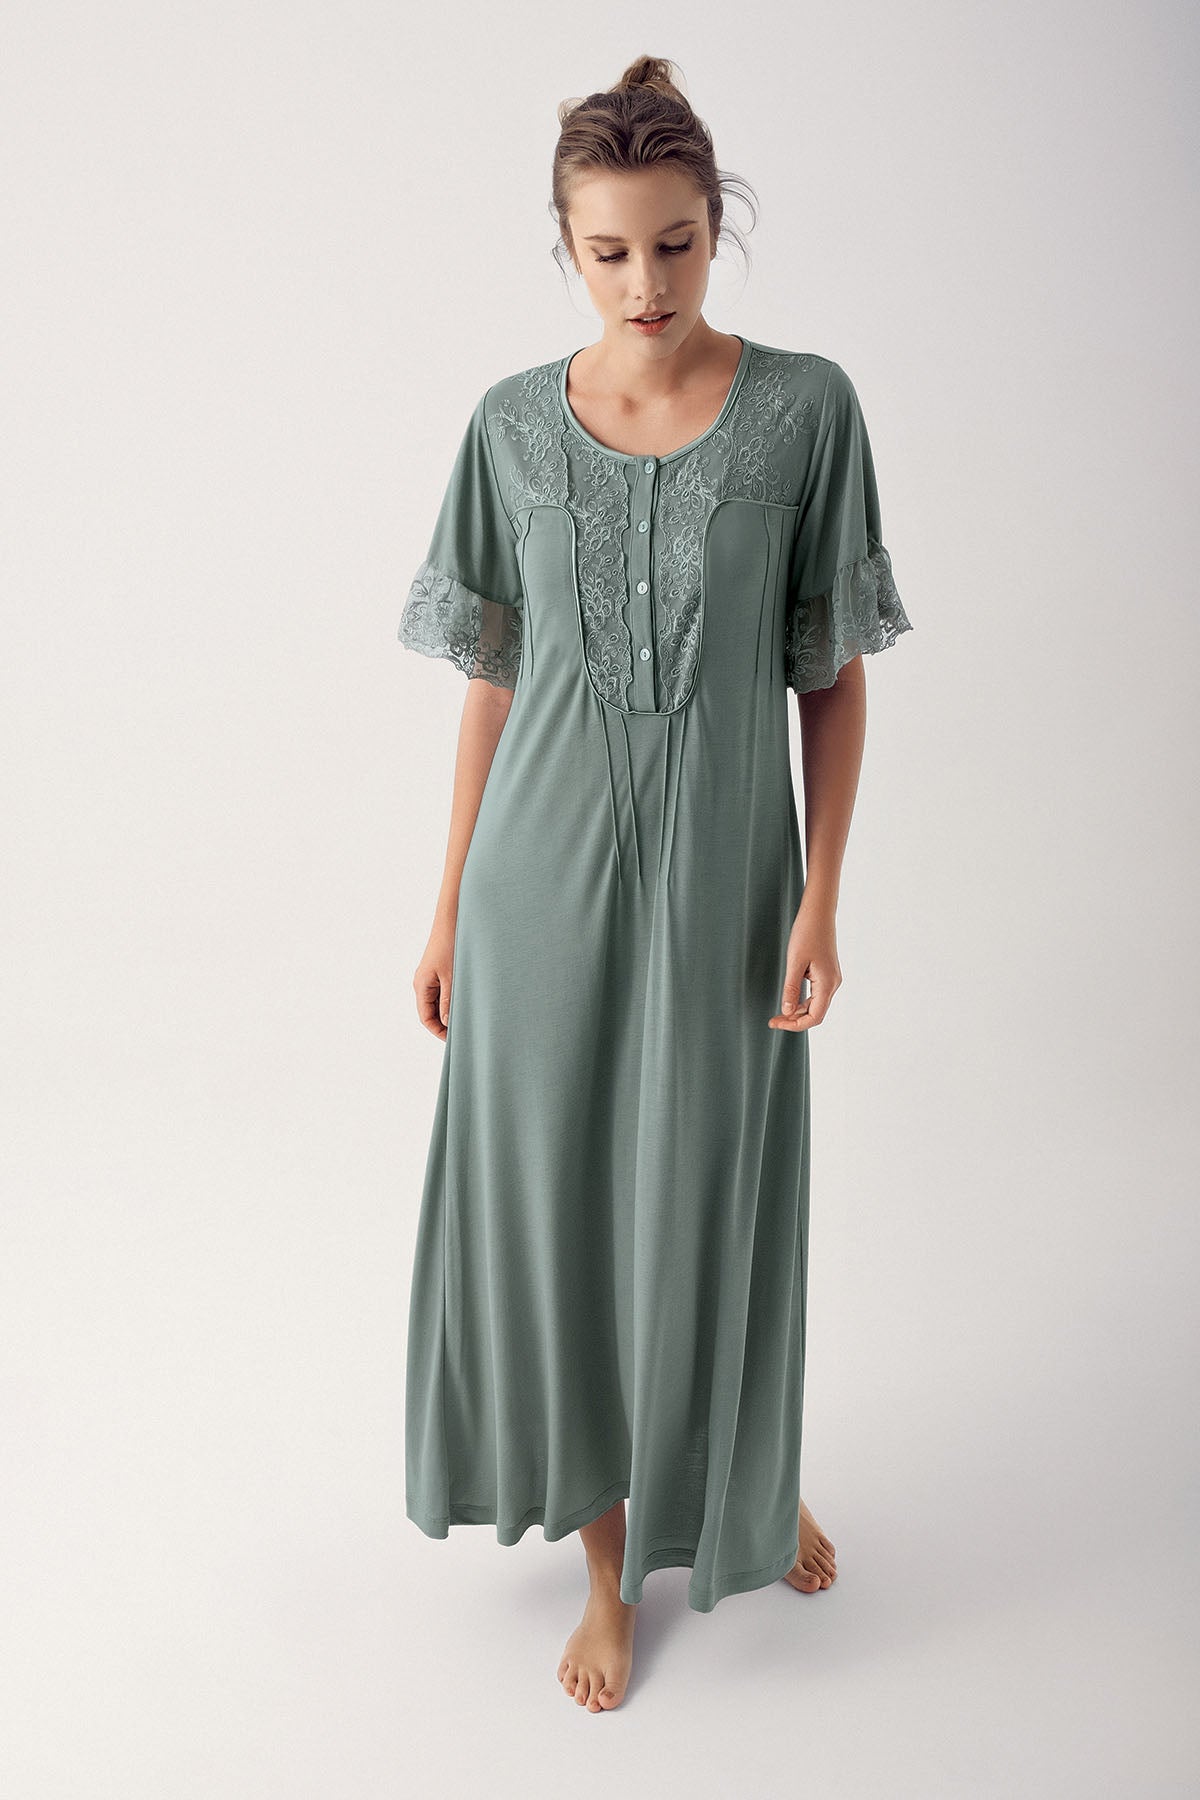 Shopymommy 14105 Collar And Sleeve Lace Maternity & Nursing Nightgown Green